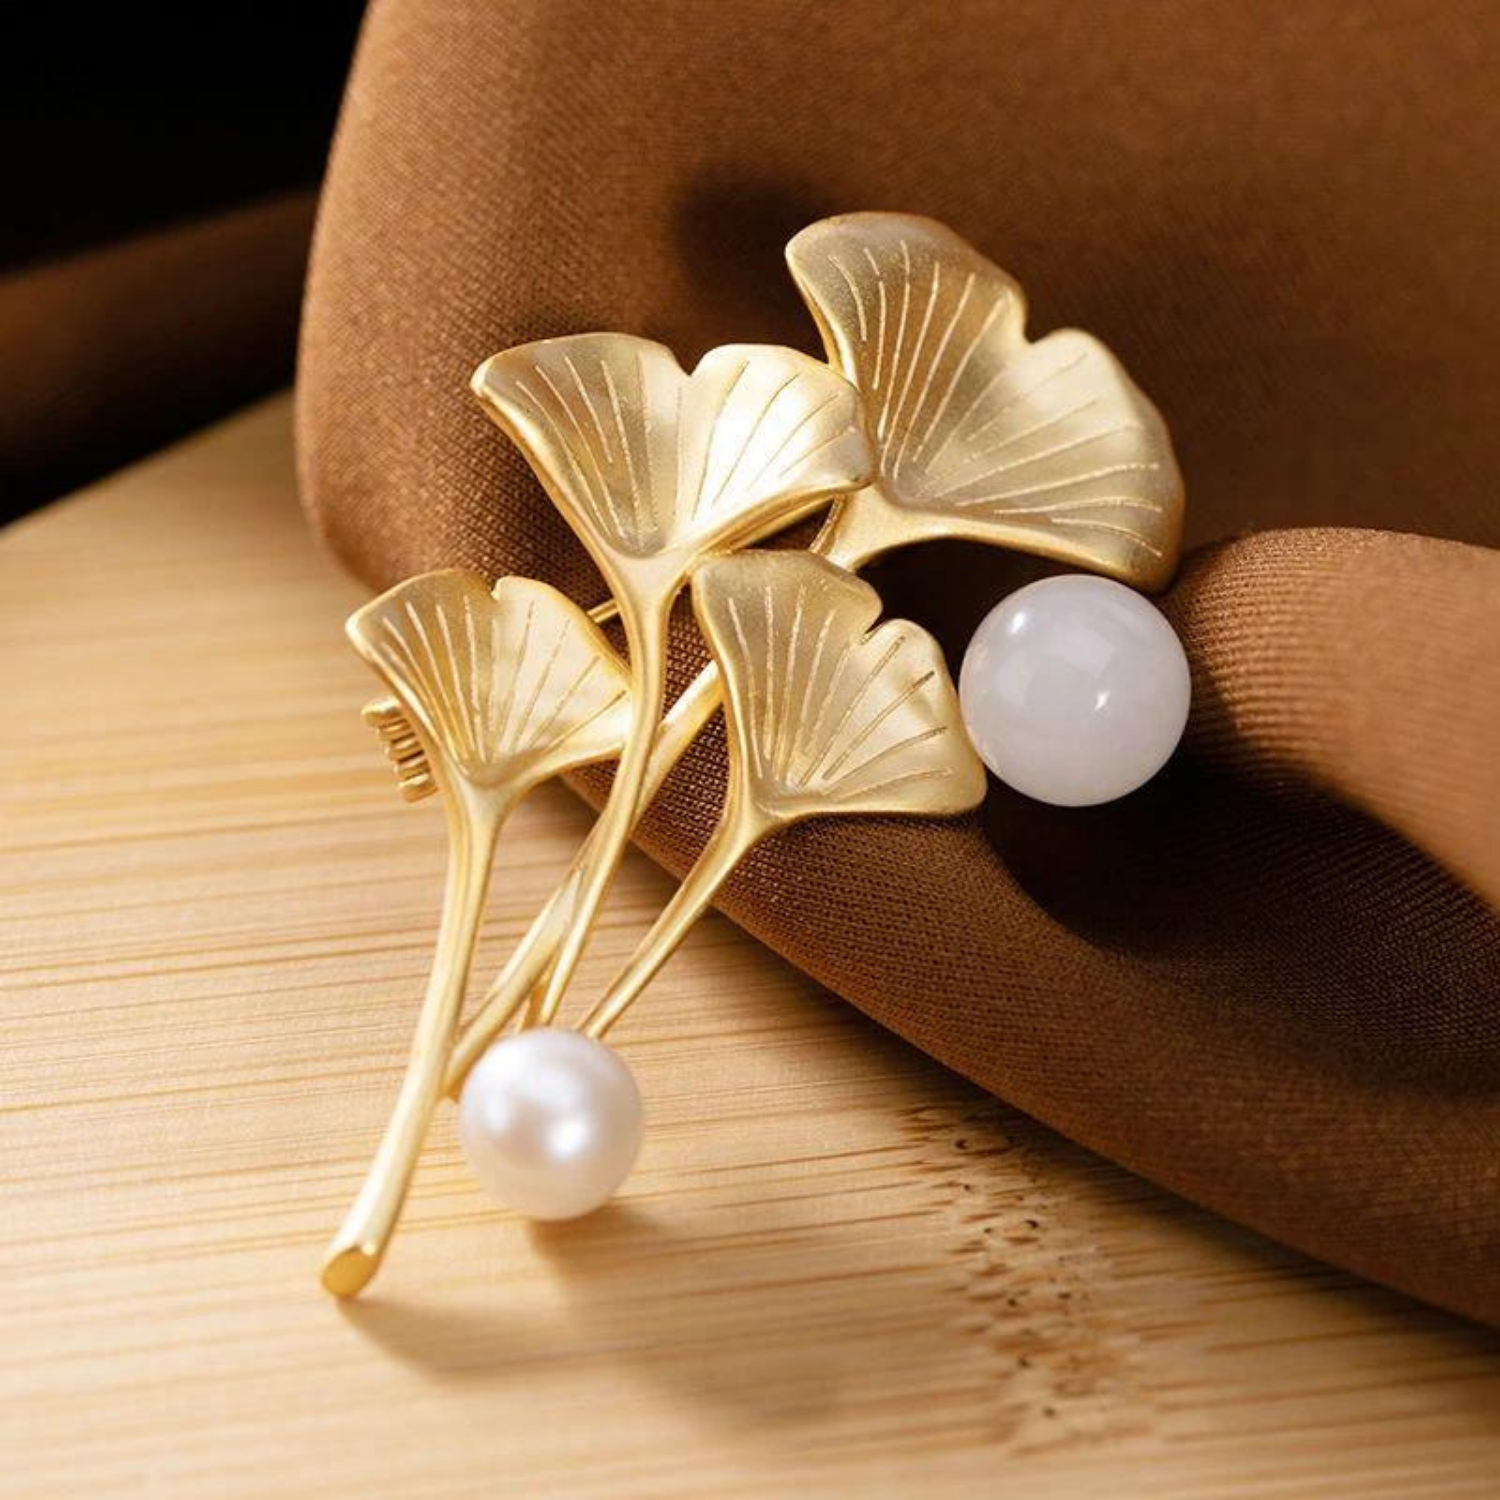 Gingko Leaf Brooch With Faux Pearls - Gold